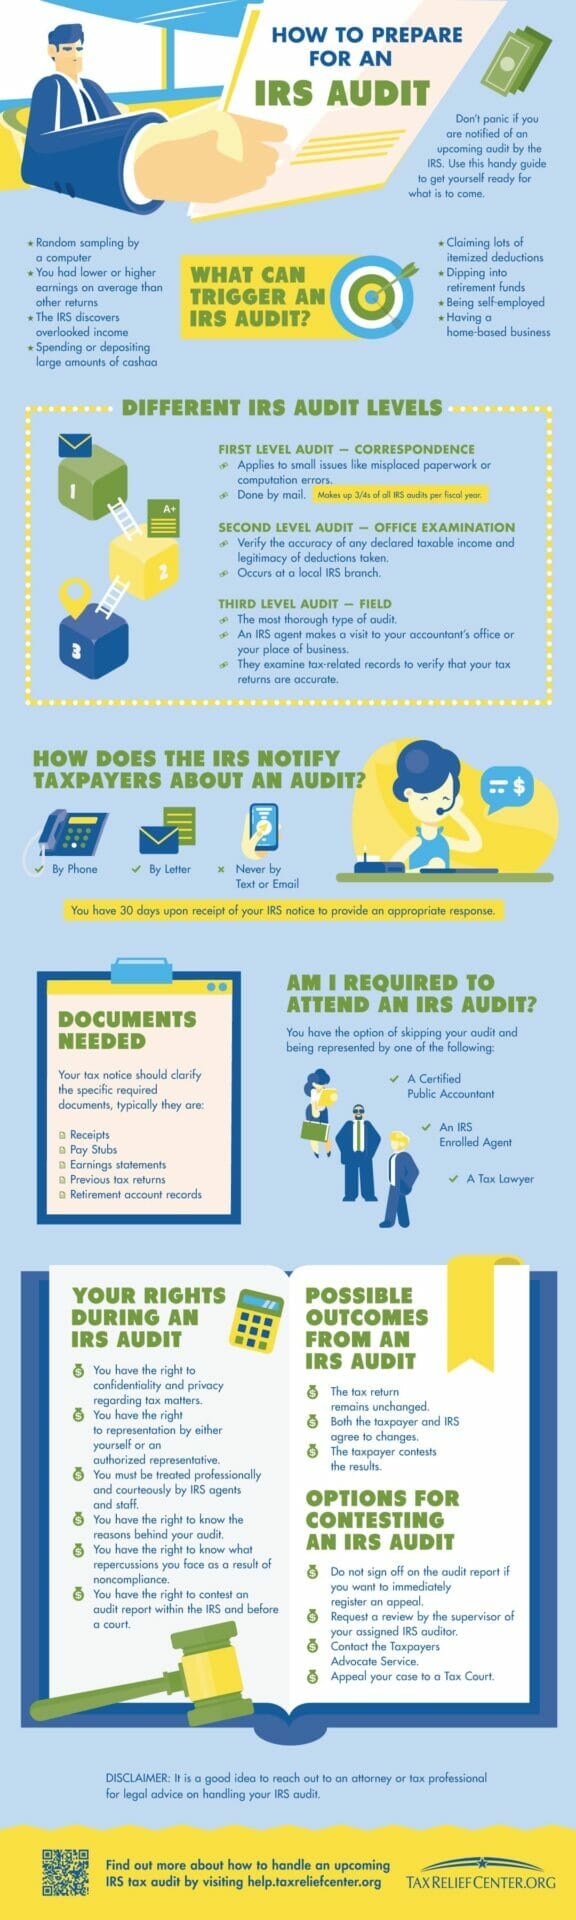 How To Prepare For An IRS Audit [INFOGRAPHIC]